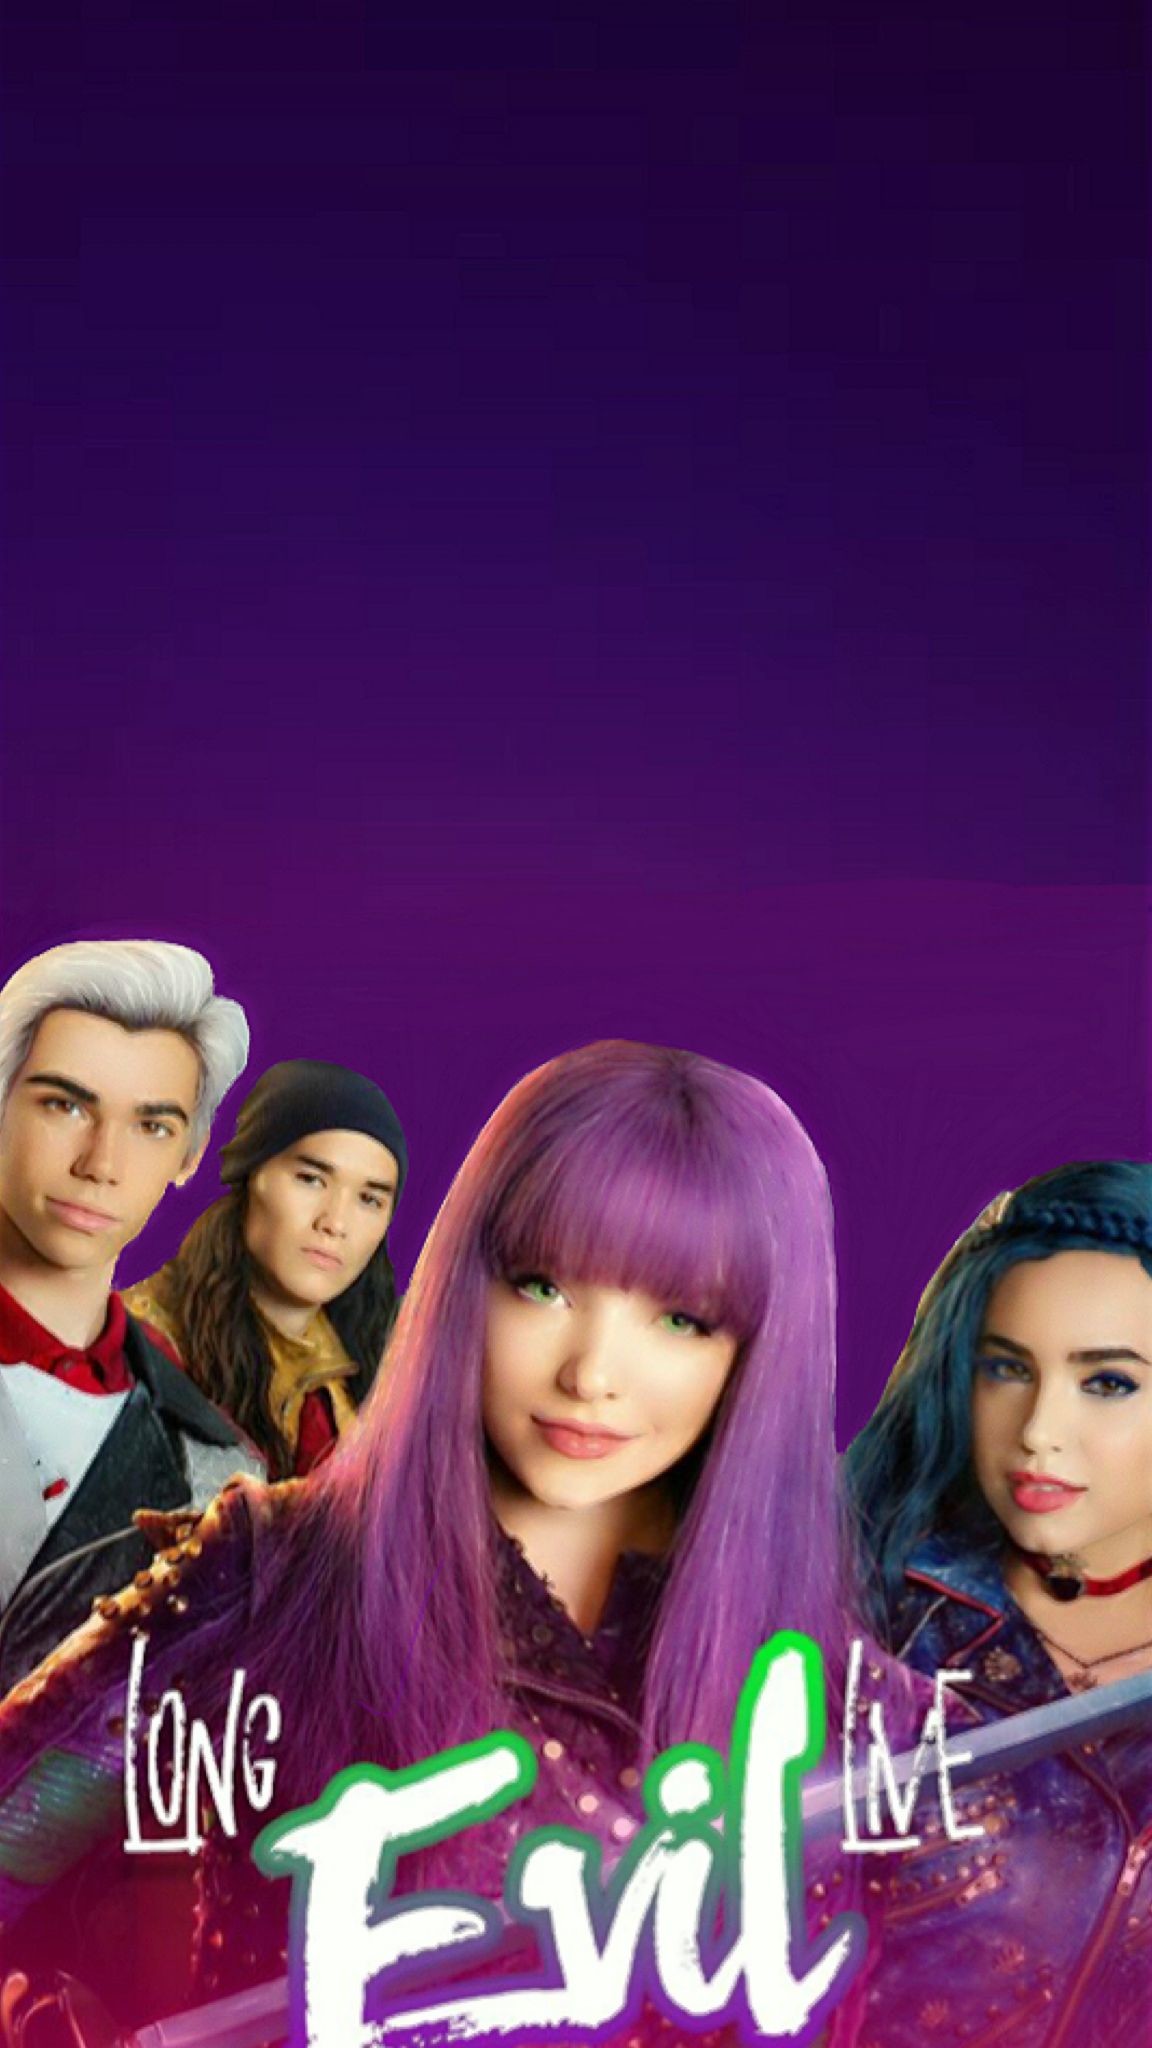 1152x2048 Long Live Havin' Some Fun rather Descendants 2 wallpaper edited by me.  Â©yayomg (long live evil logo with the cast)